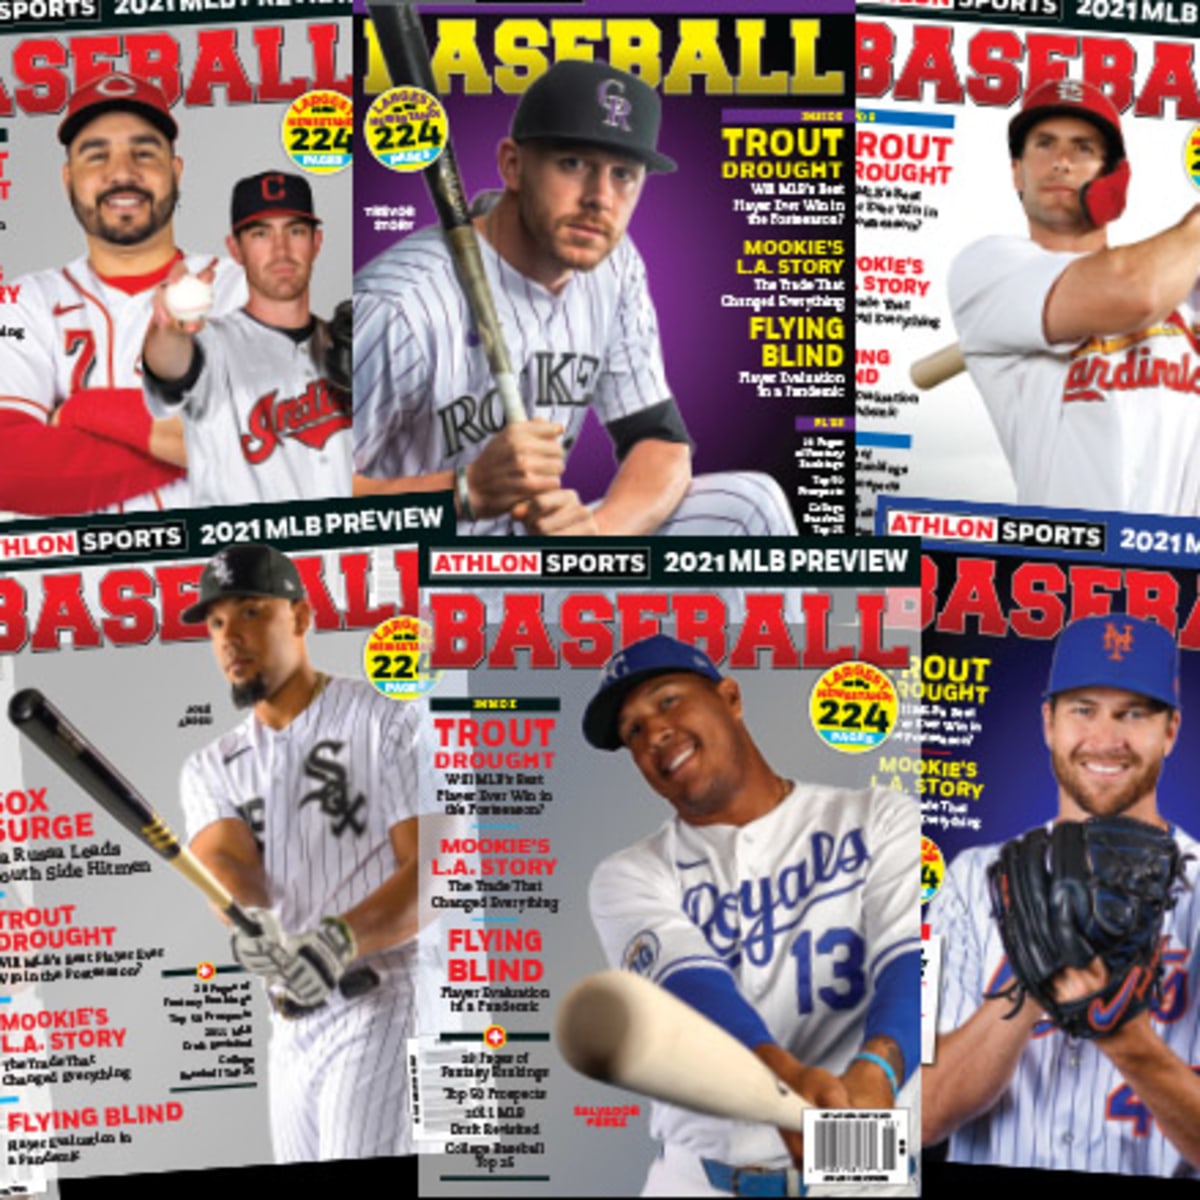 Athlon Sports' 2021 Baseball Preview Magazine is Available Now